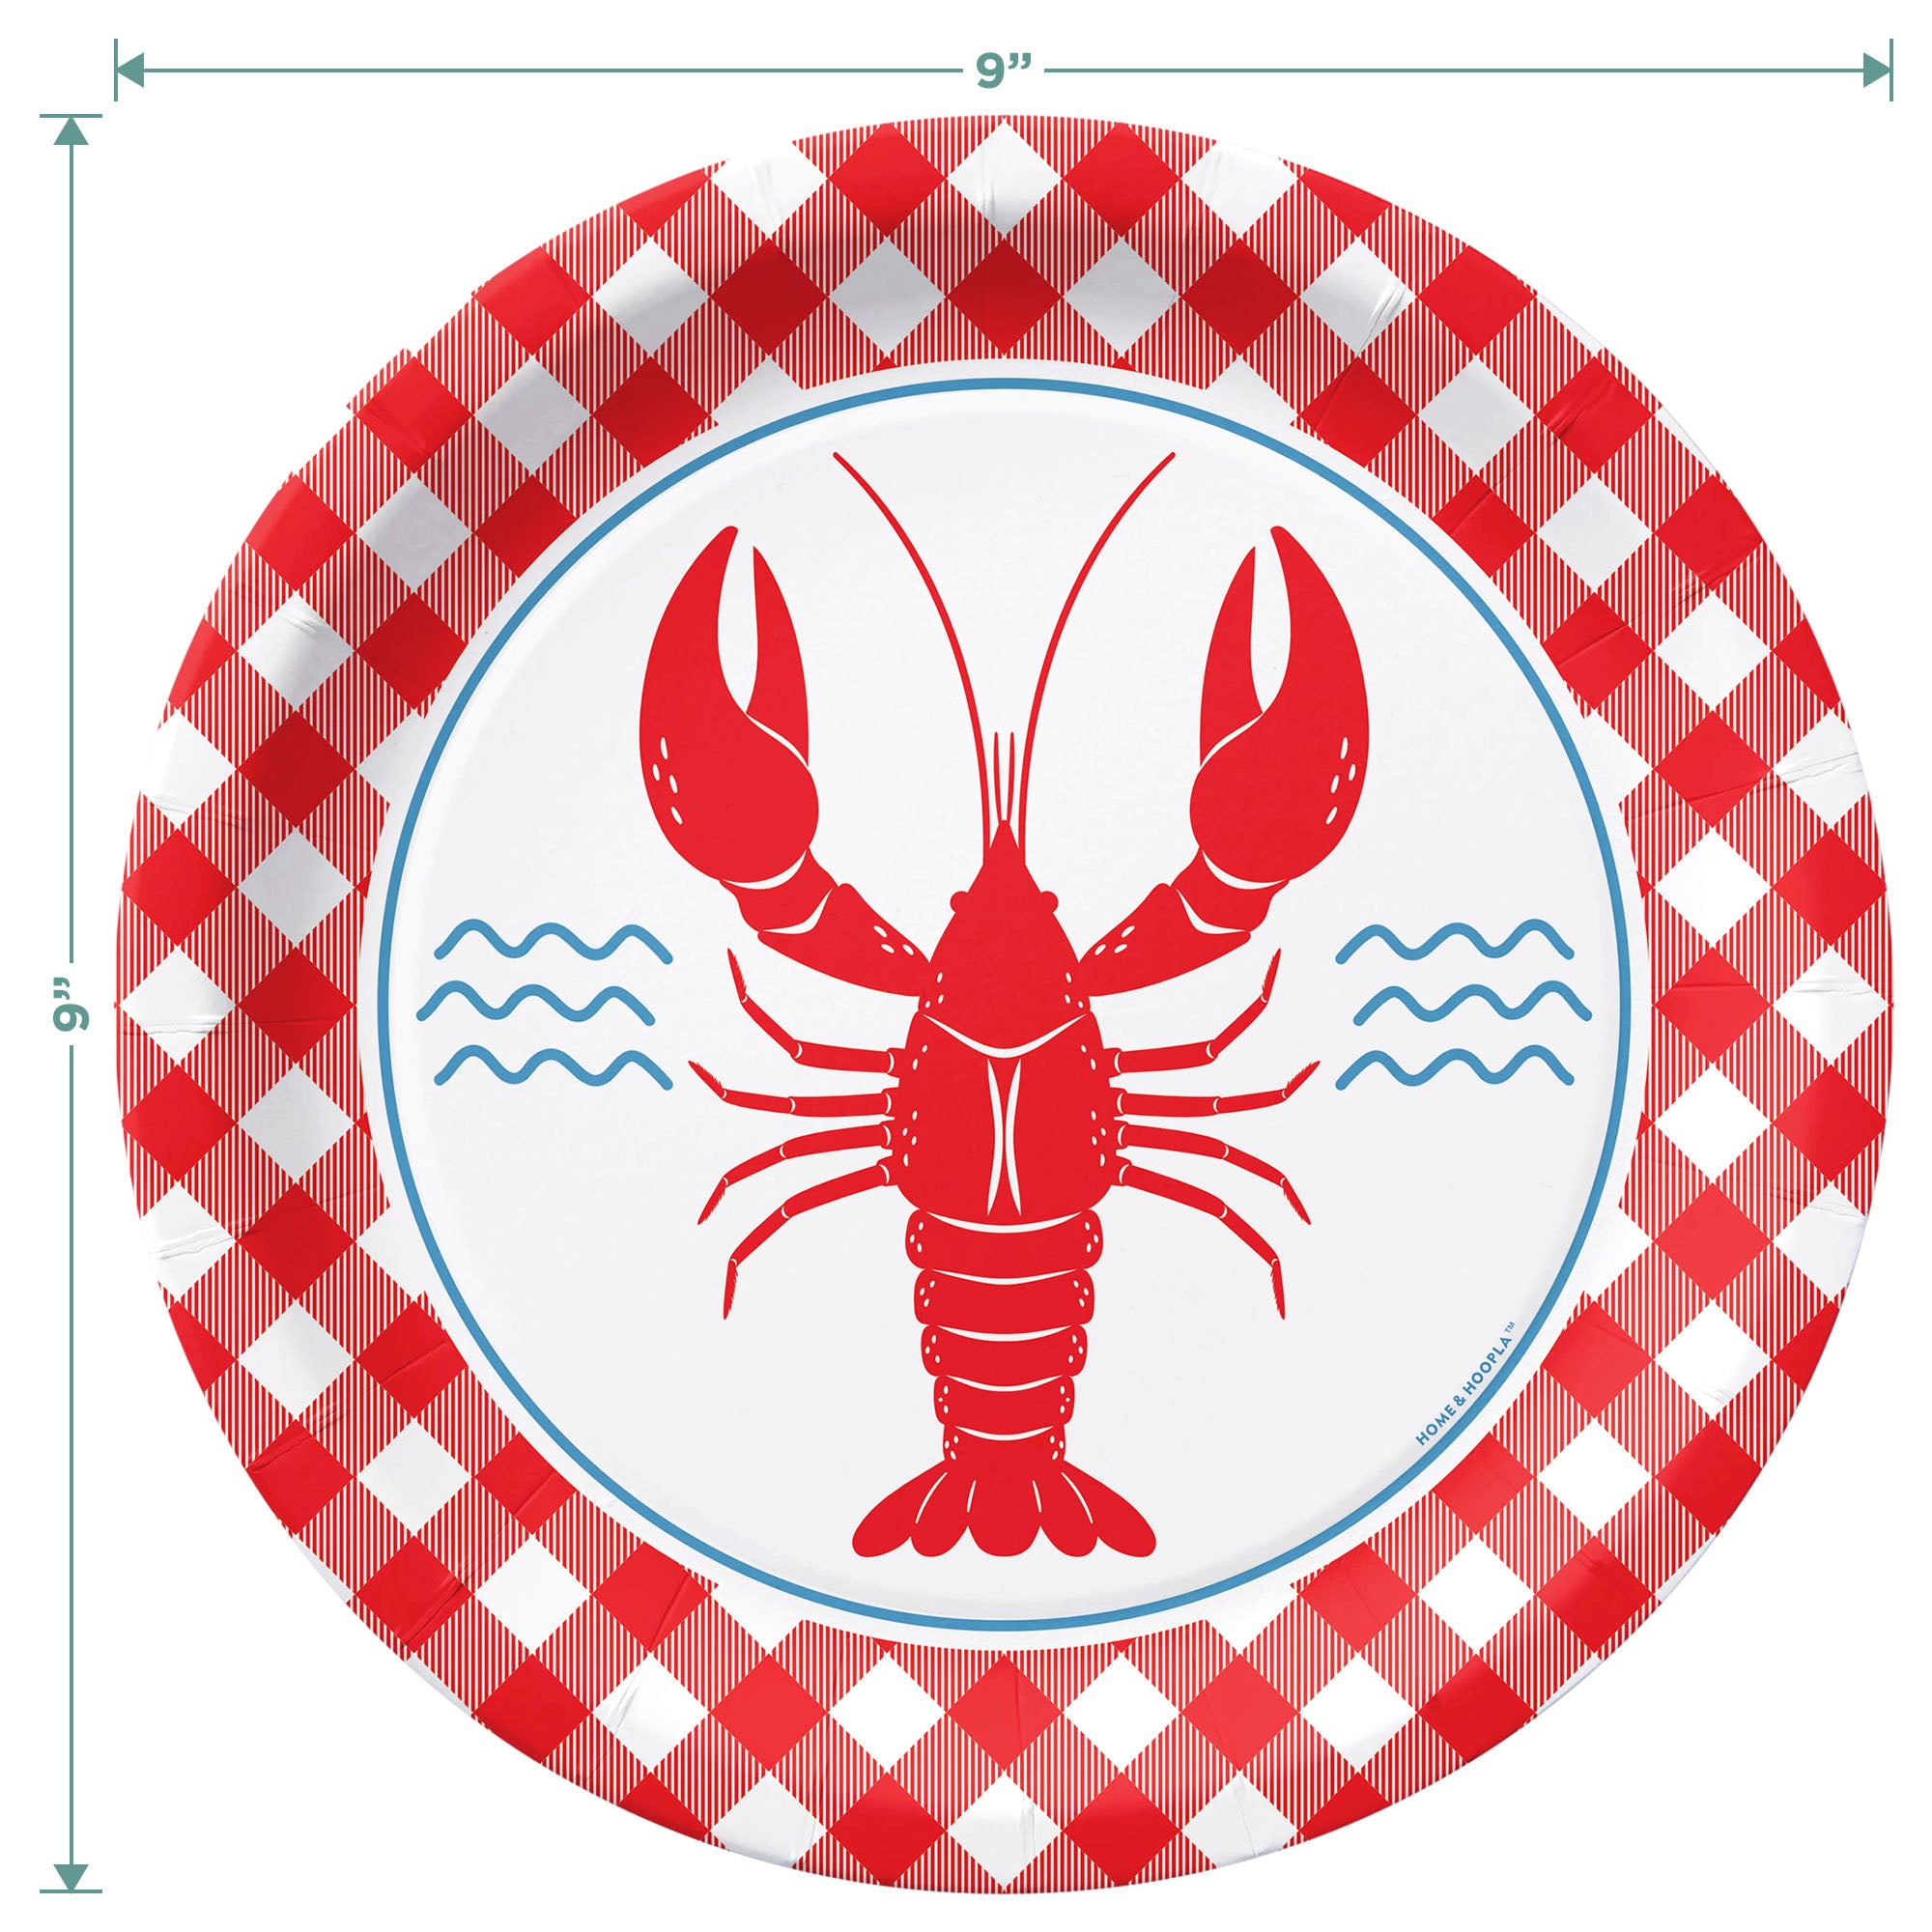 Xigejob Crawfish Boil Party Supplies - Lobster Boil Party Decorations  Tableware, Plate, Cup, Napkin, Tablecloth, Cutlery, Crayfish Crab Seafood  Boil